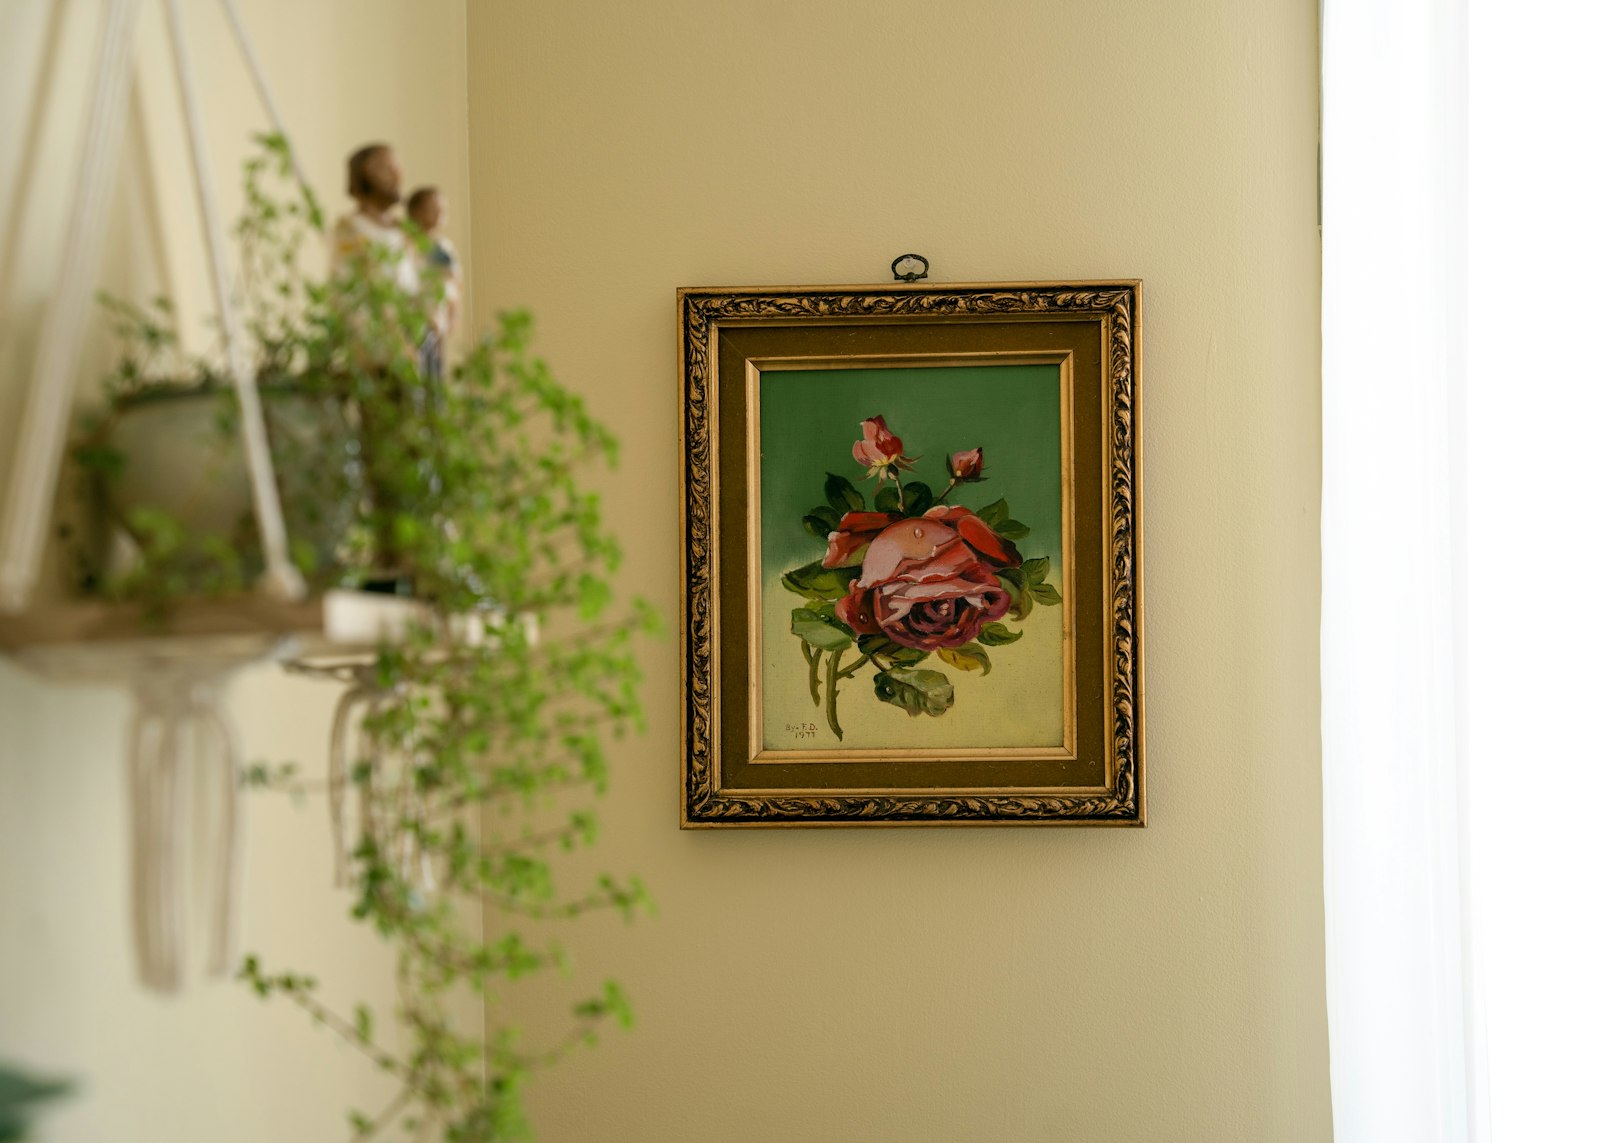 A painting by Zabawski's grandmother, who taught her how to paint, hangs in Mary's home office.